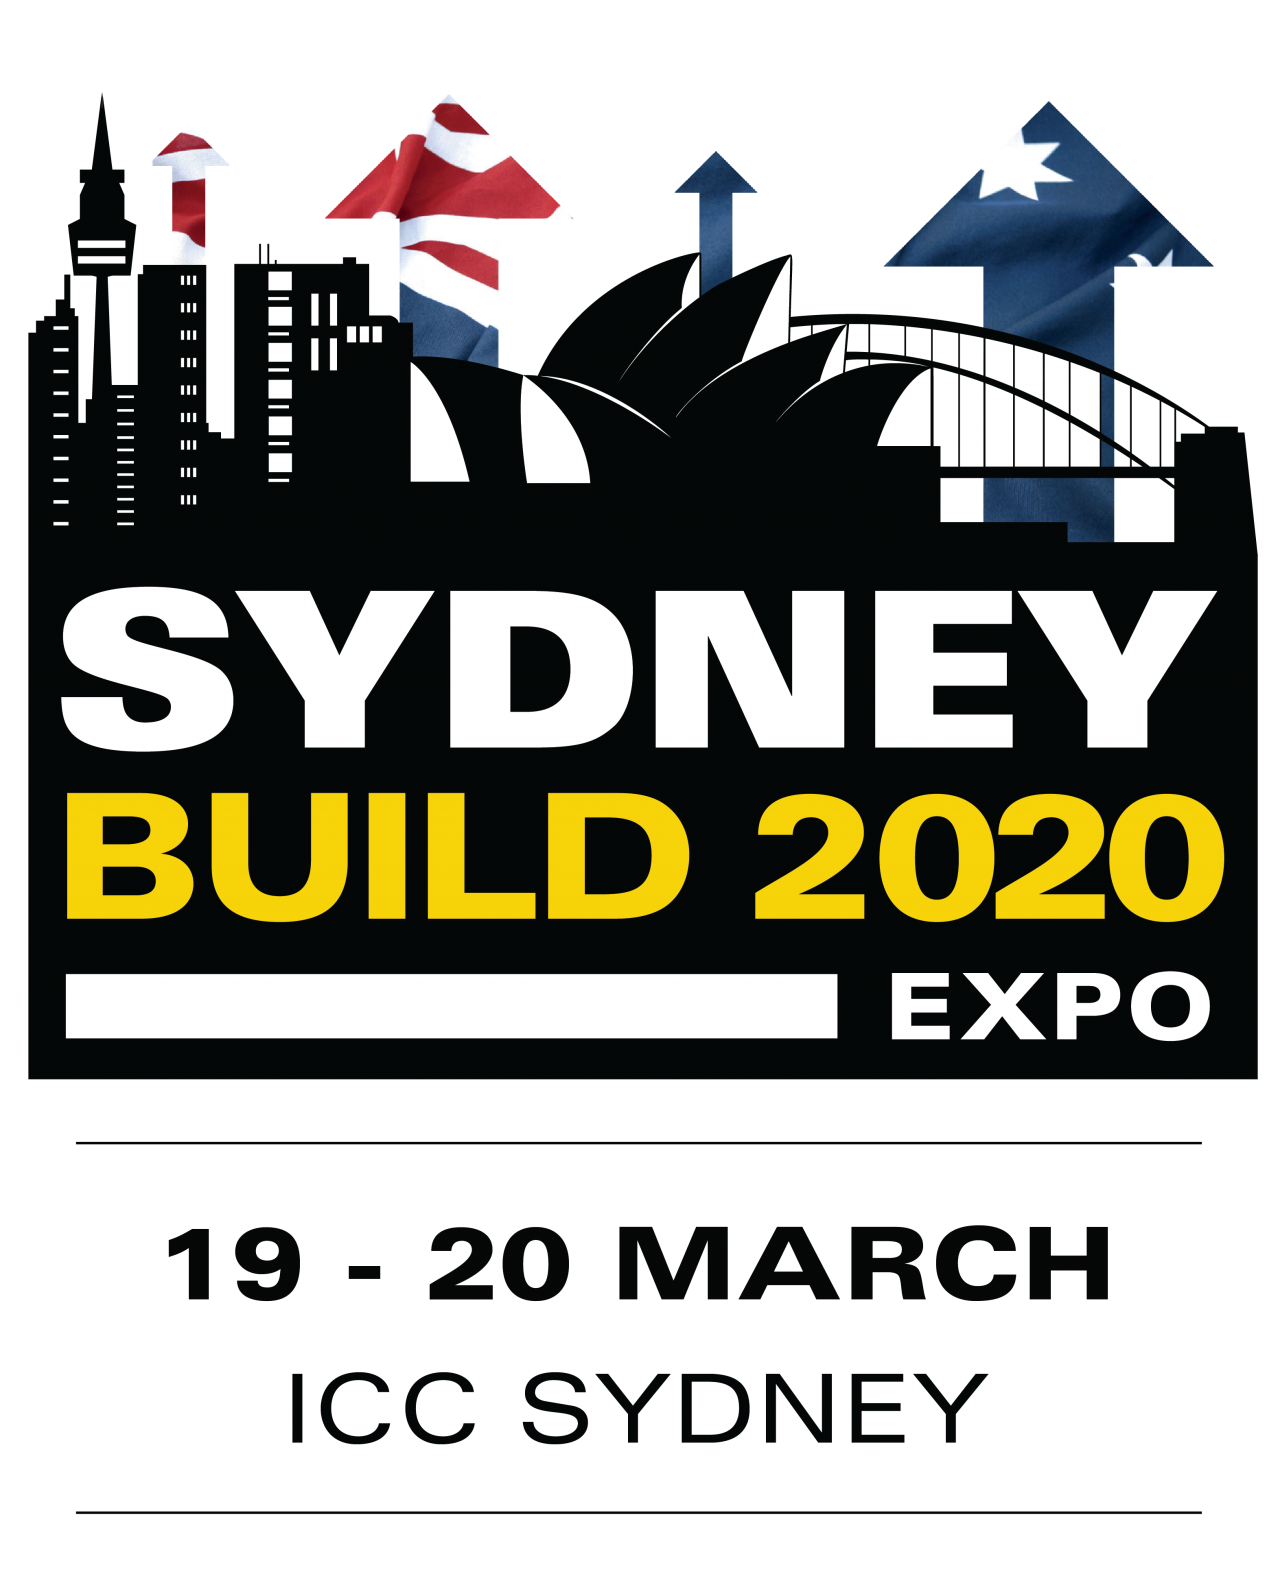 About Sydney Build Expo 2020